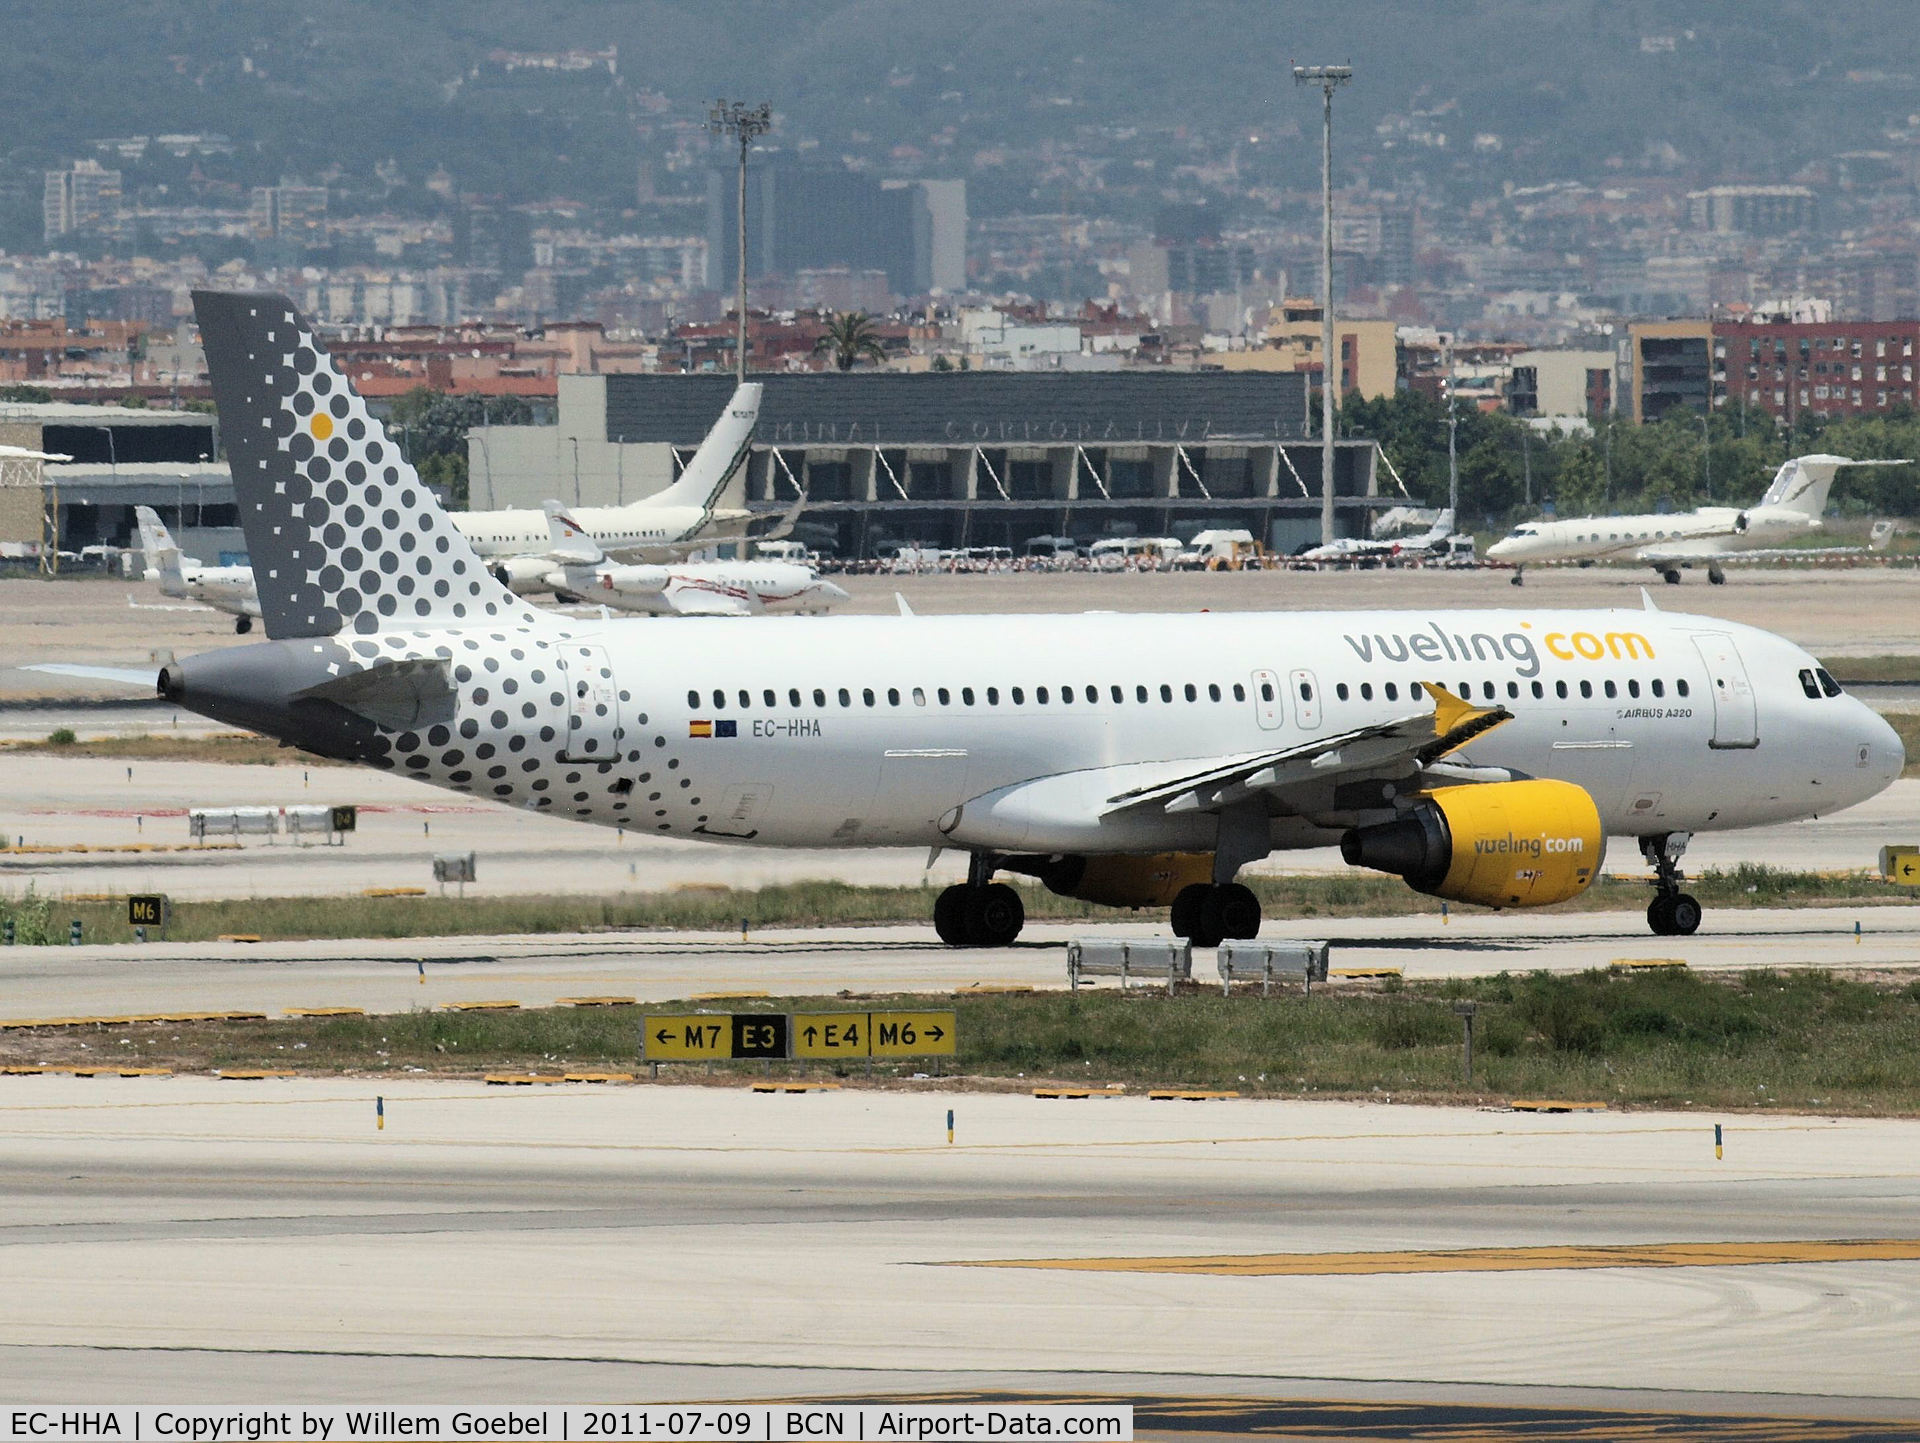 EC-HHA, 2000 Airbus A320-214 C/N 1221, Prepare for take off from Barcelona Airport